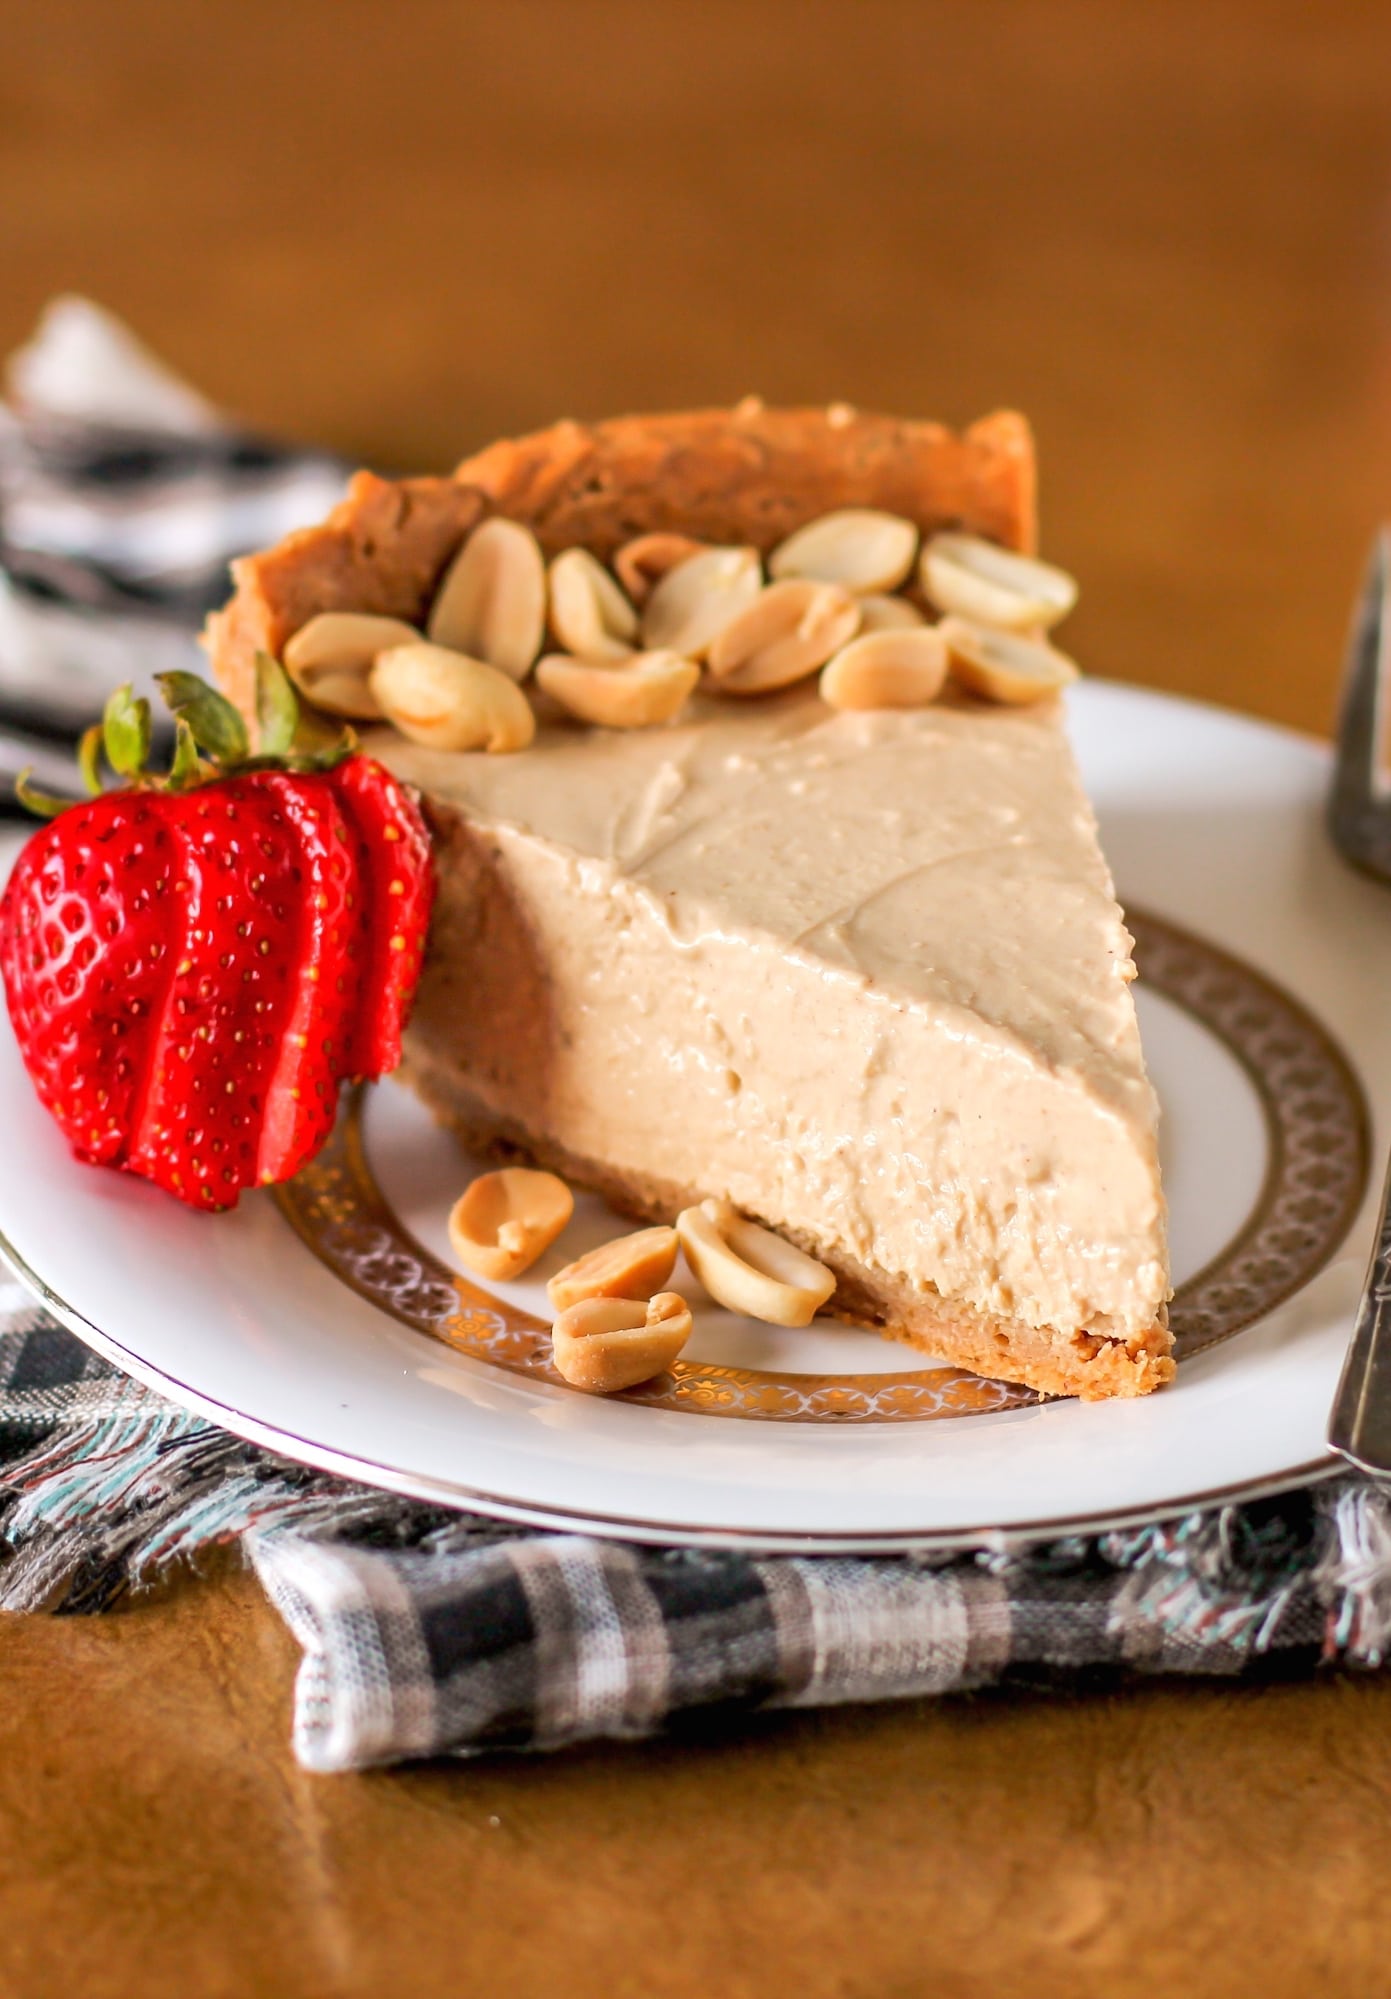 Healthy Peanut Butter Pie - Naughty or Nice Cookbook